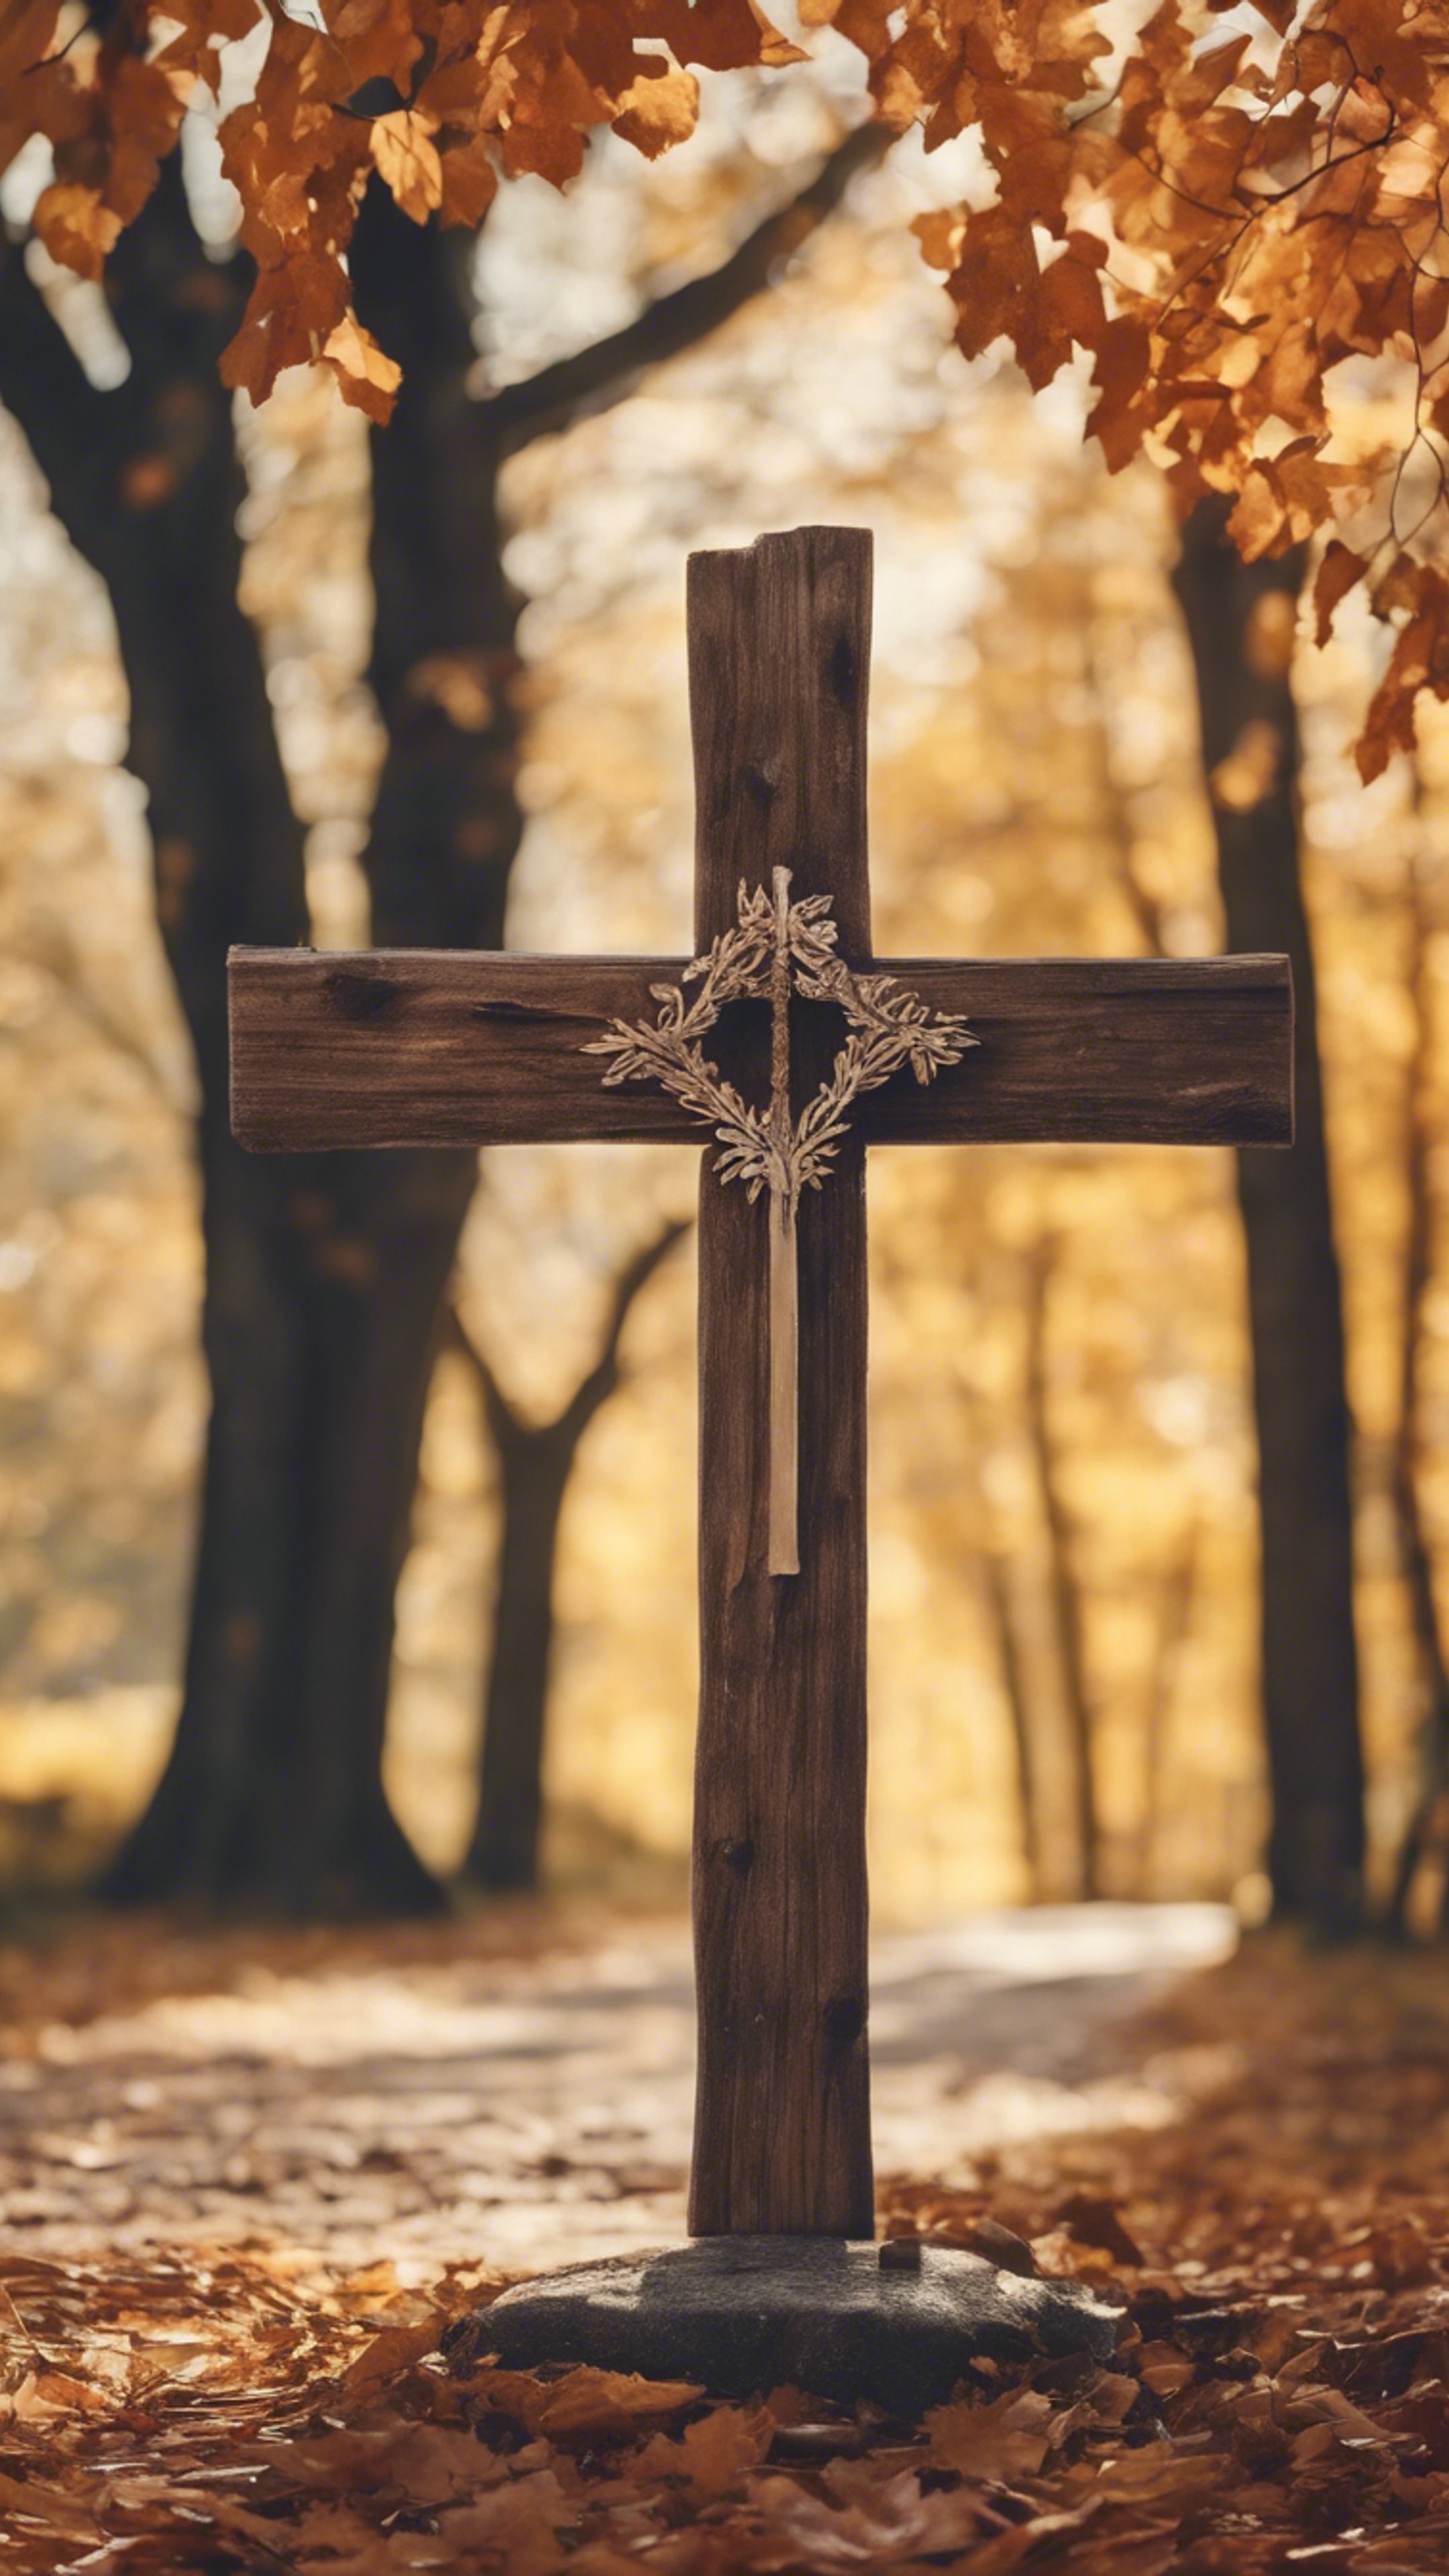 A rustic wooden cross standing by a country road, surrounded by autumn leaves. کاغذ دیواری[8ef87987617941c481d6]